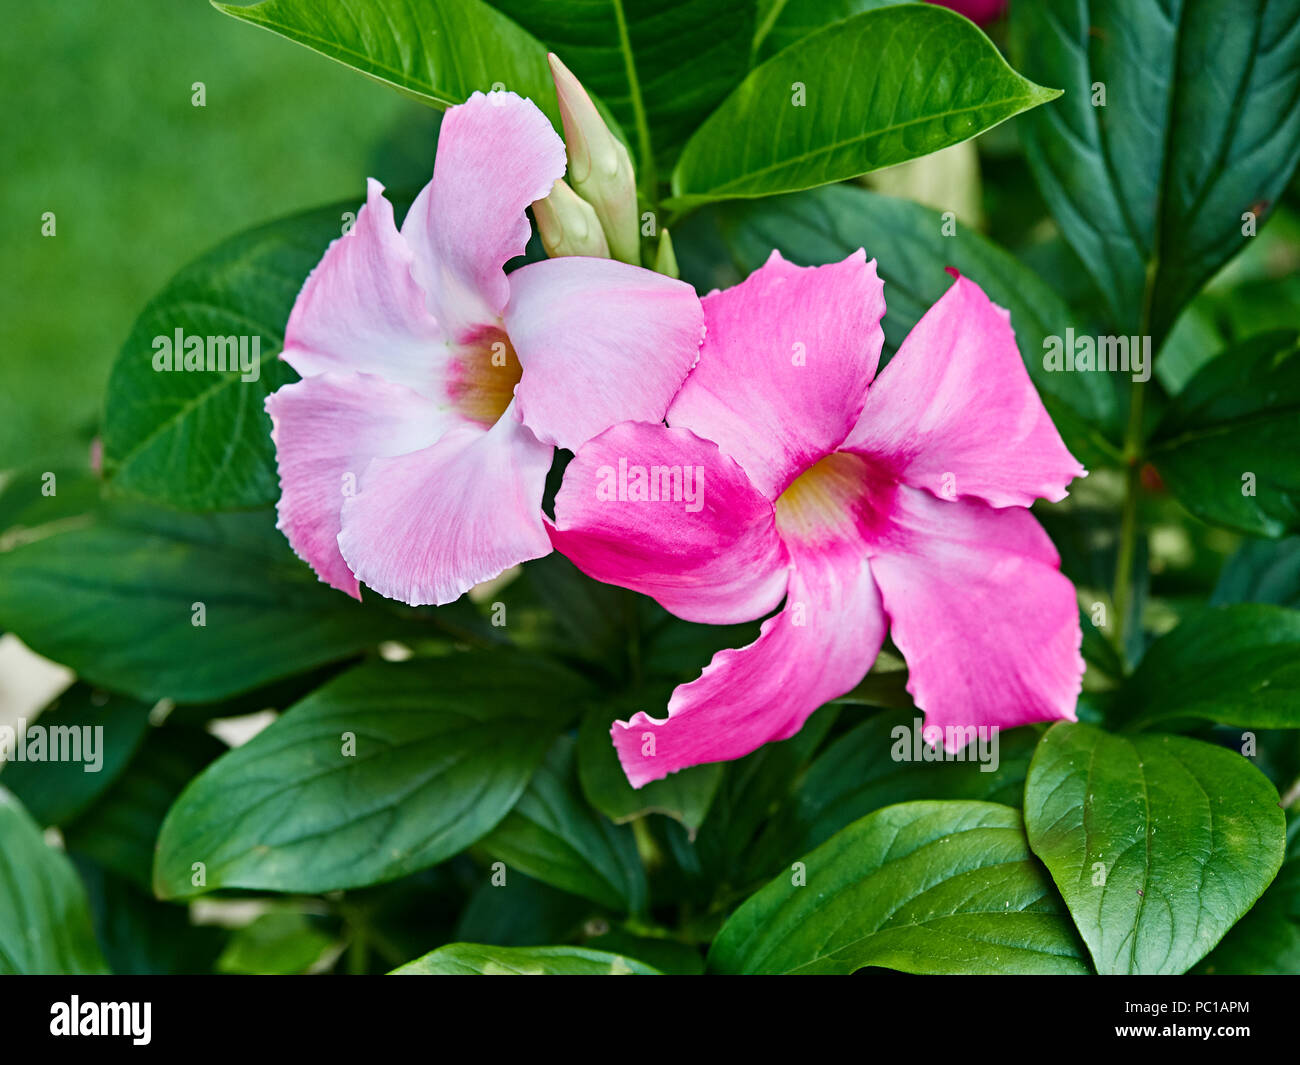 Pink Mandevilla flowering vine flowers belonging to the dogbane family, Apocynaceae, with a common name of rock trumpet growing in a patio garden. Stock Photo